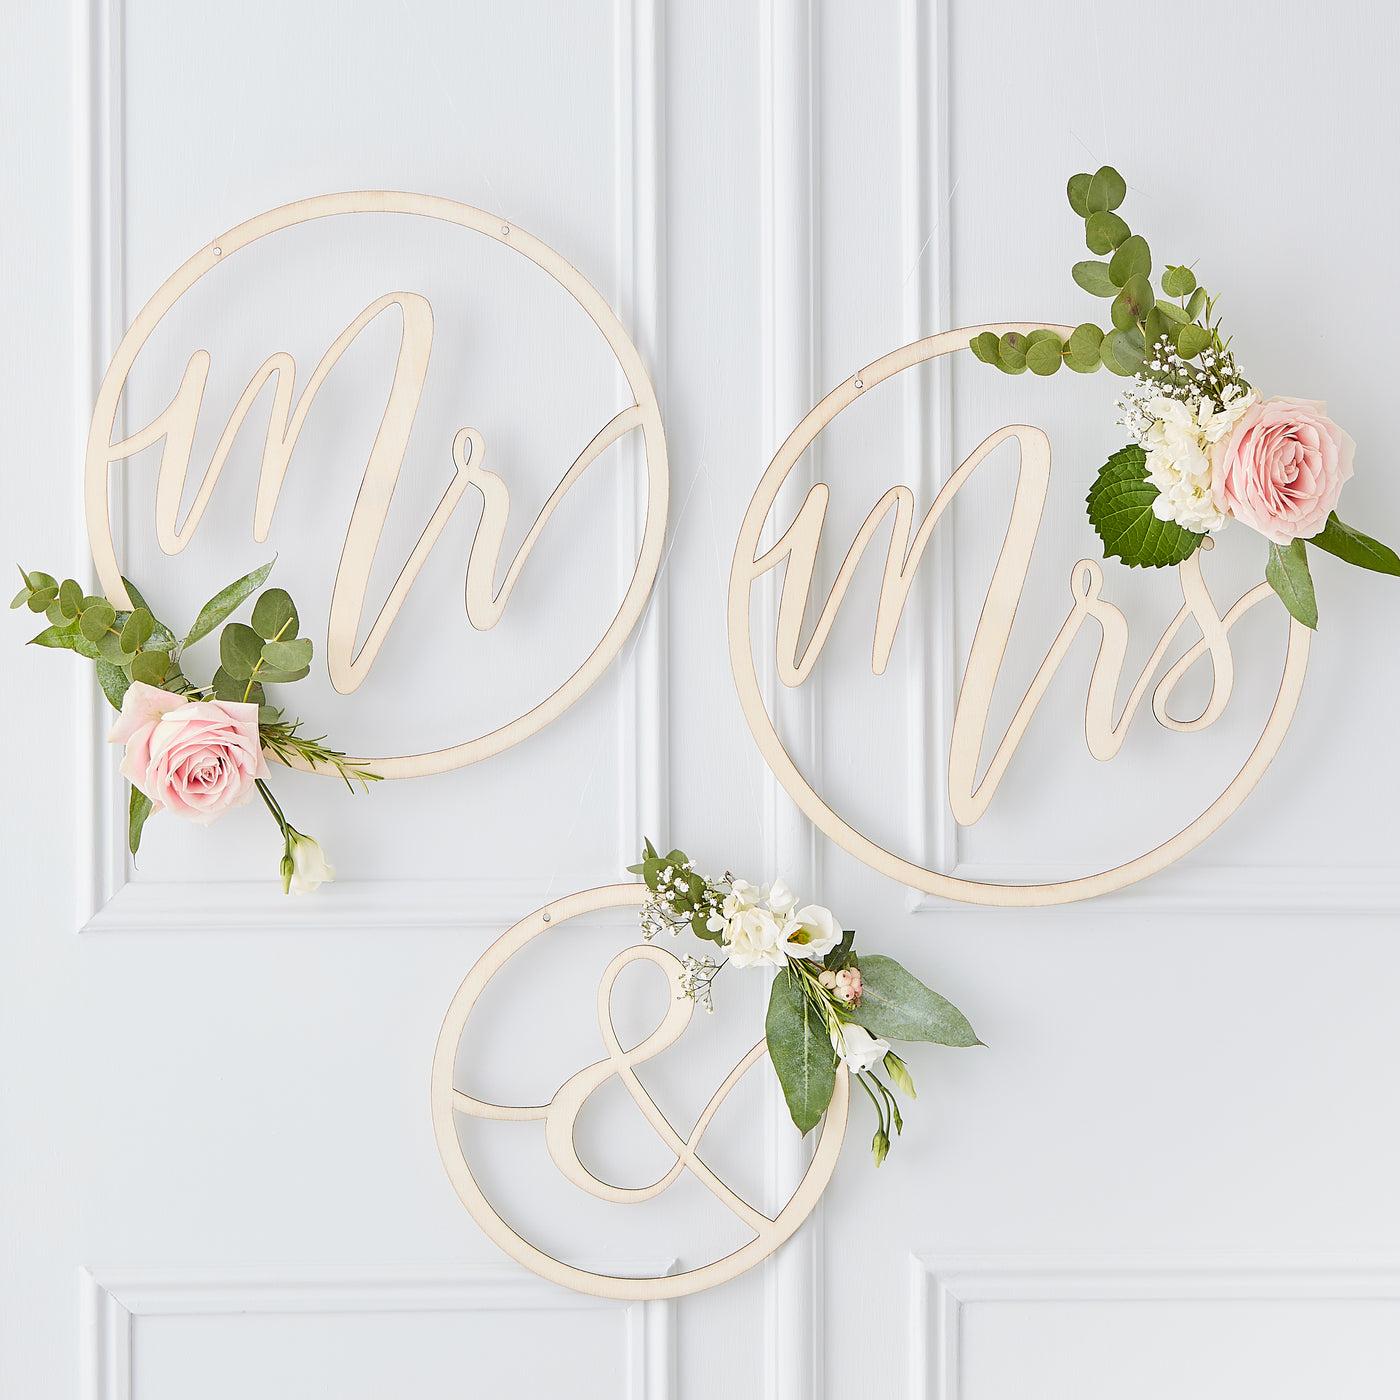 Gorgeous Rustic Mr & Mrs Wooden Hoops With Flower